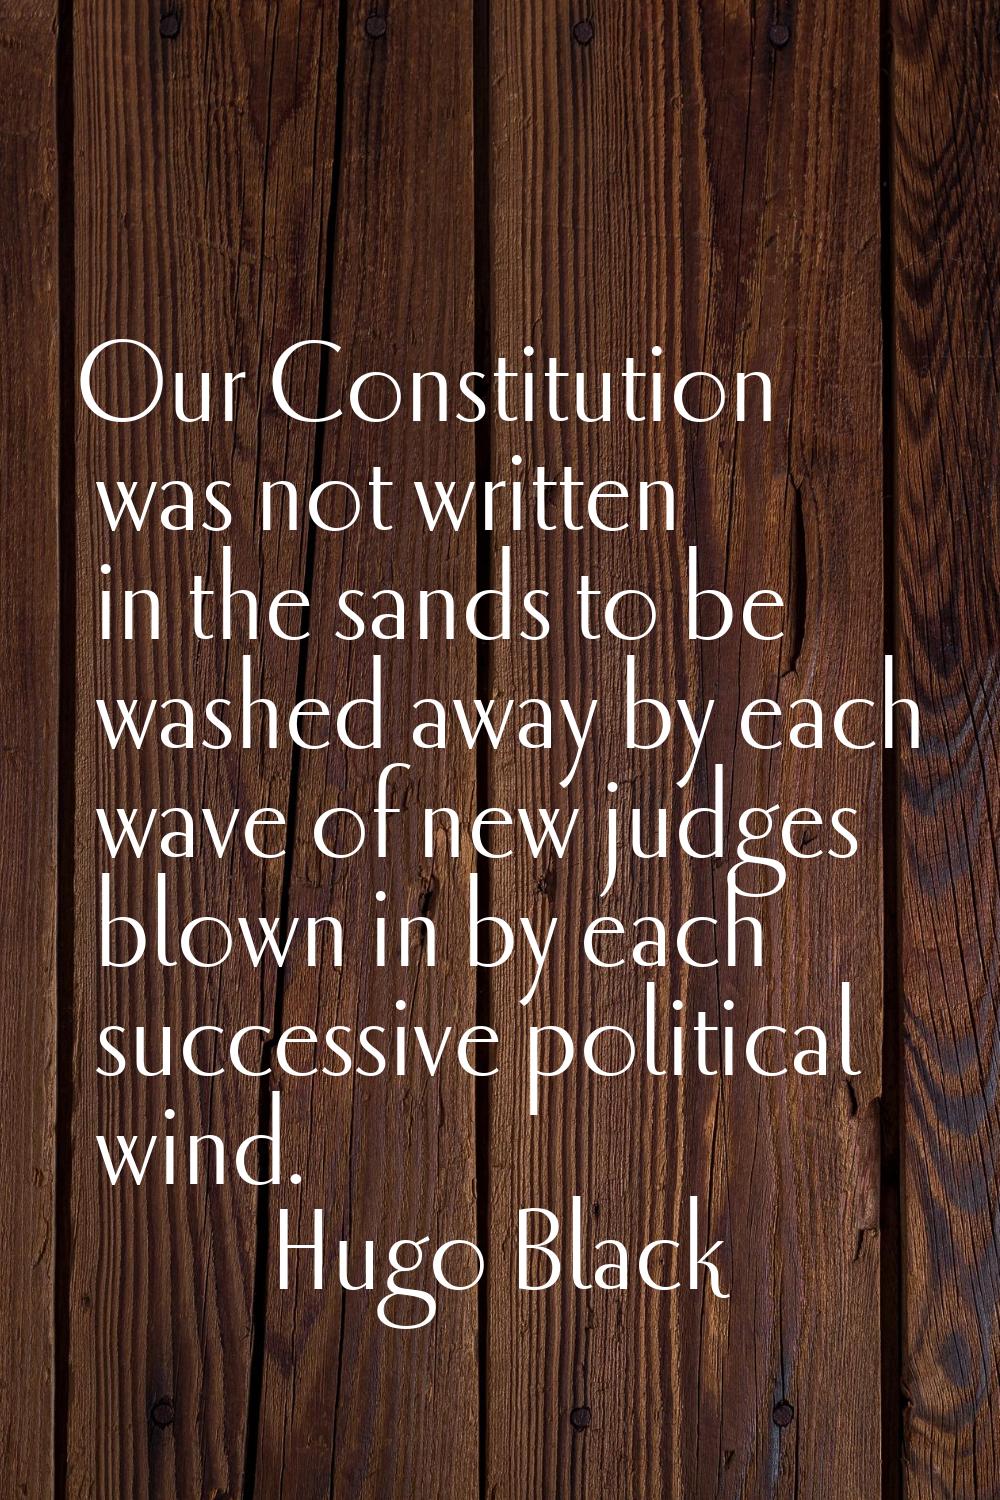 Our Constitution was not written in the sands to be washed away by each wave of new judges blown in